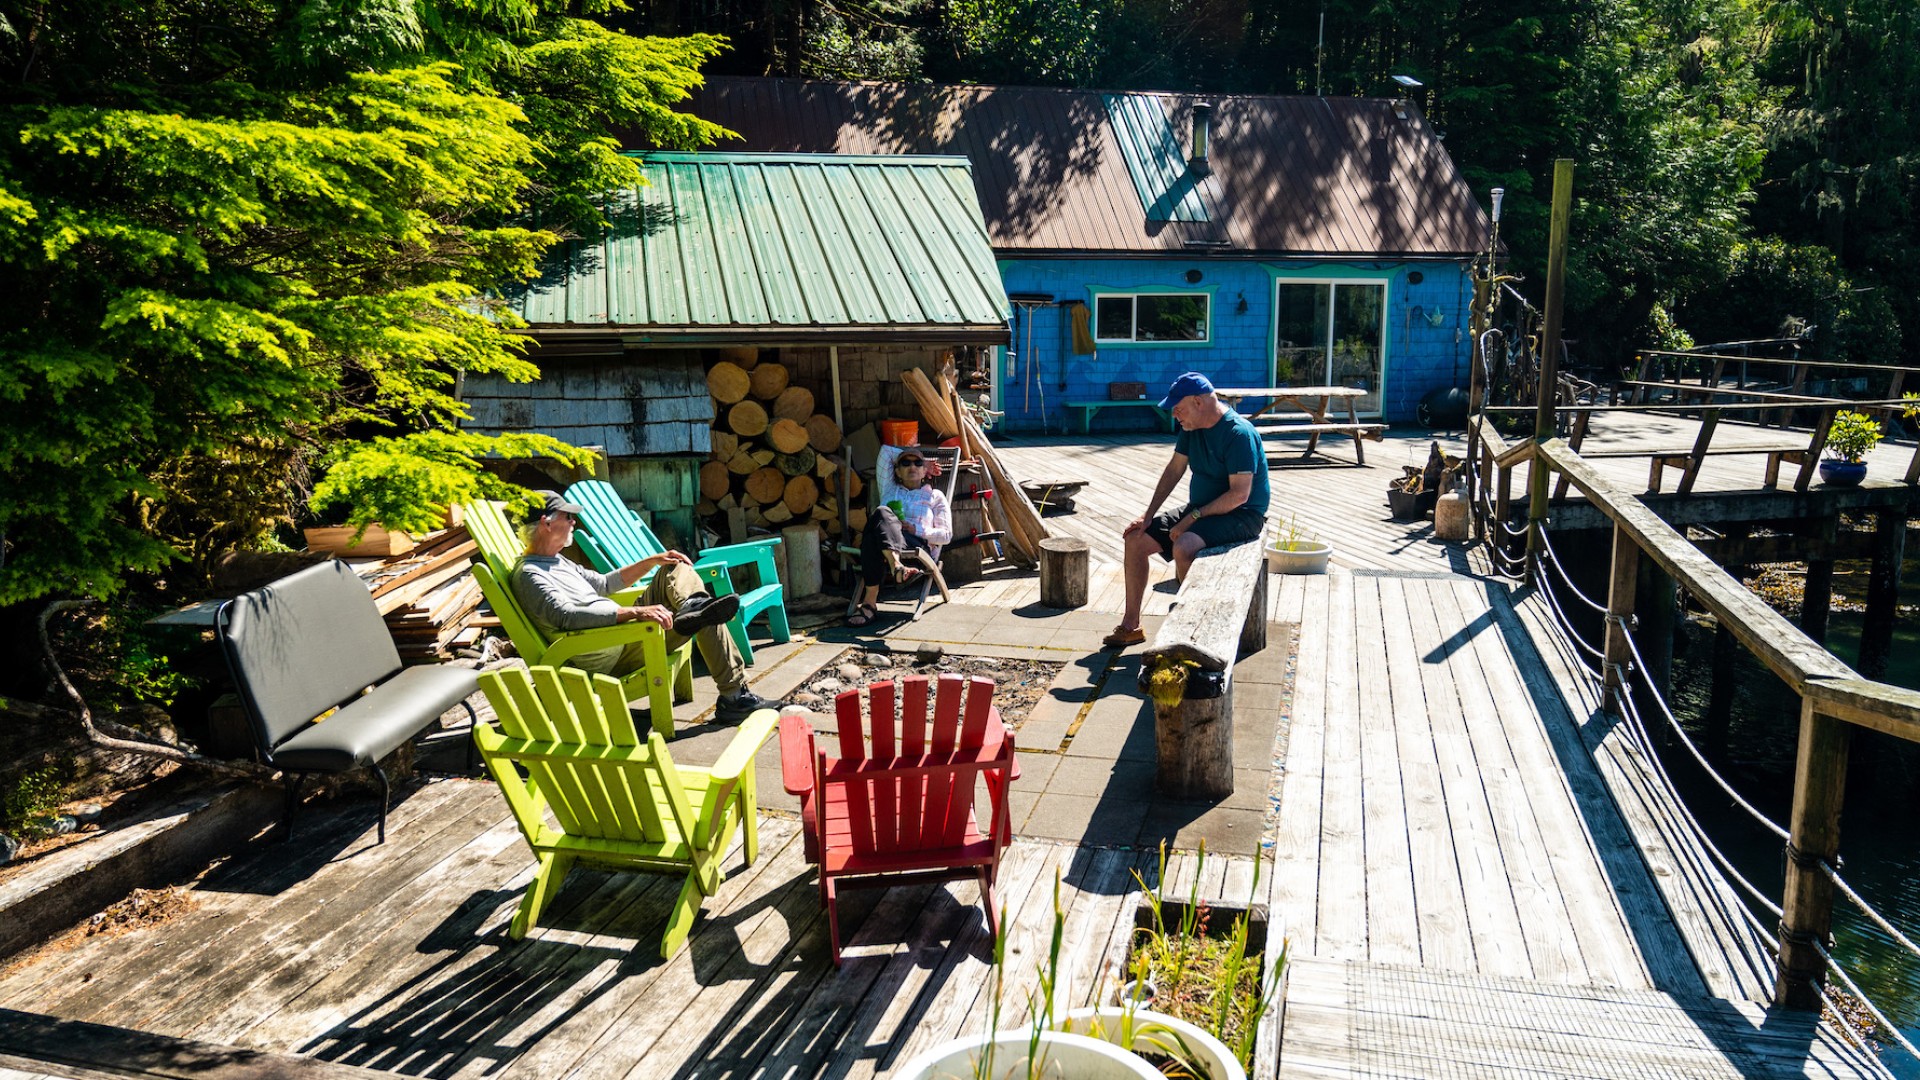 People sitting in colorful plastic lawn chairs on a deck at God's Pocket Resort in British Columia